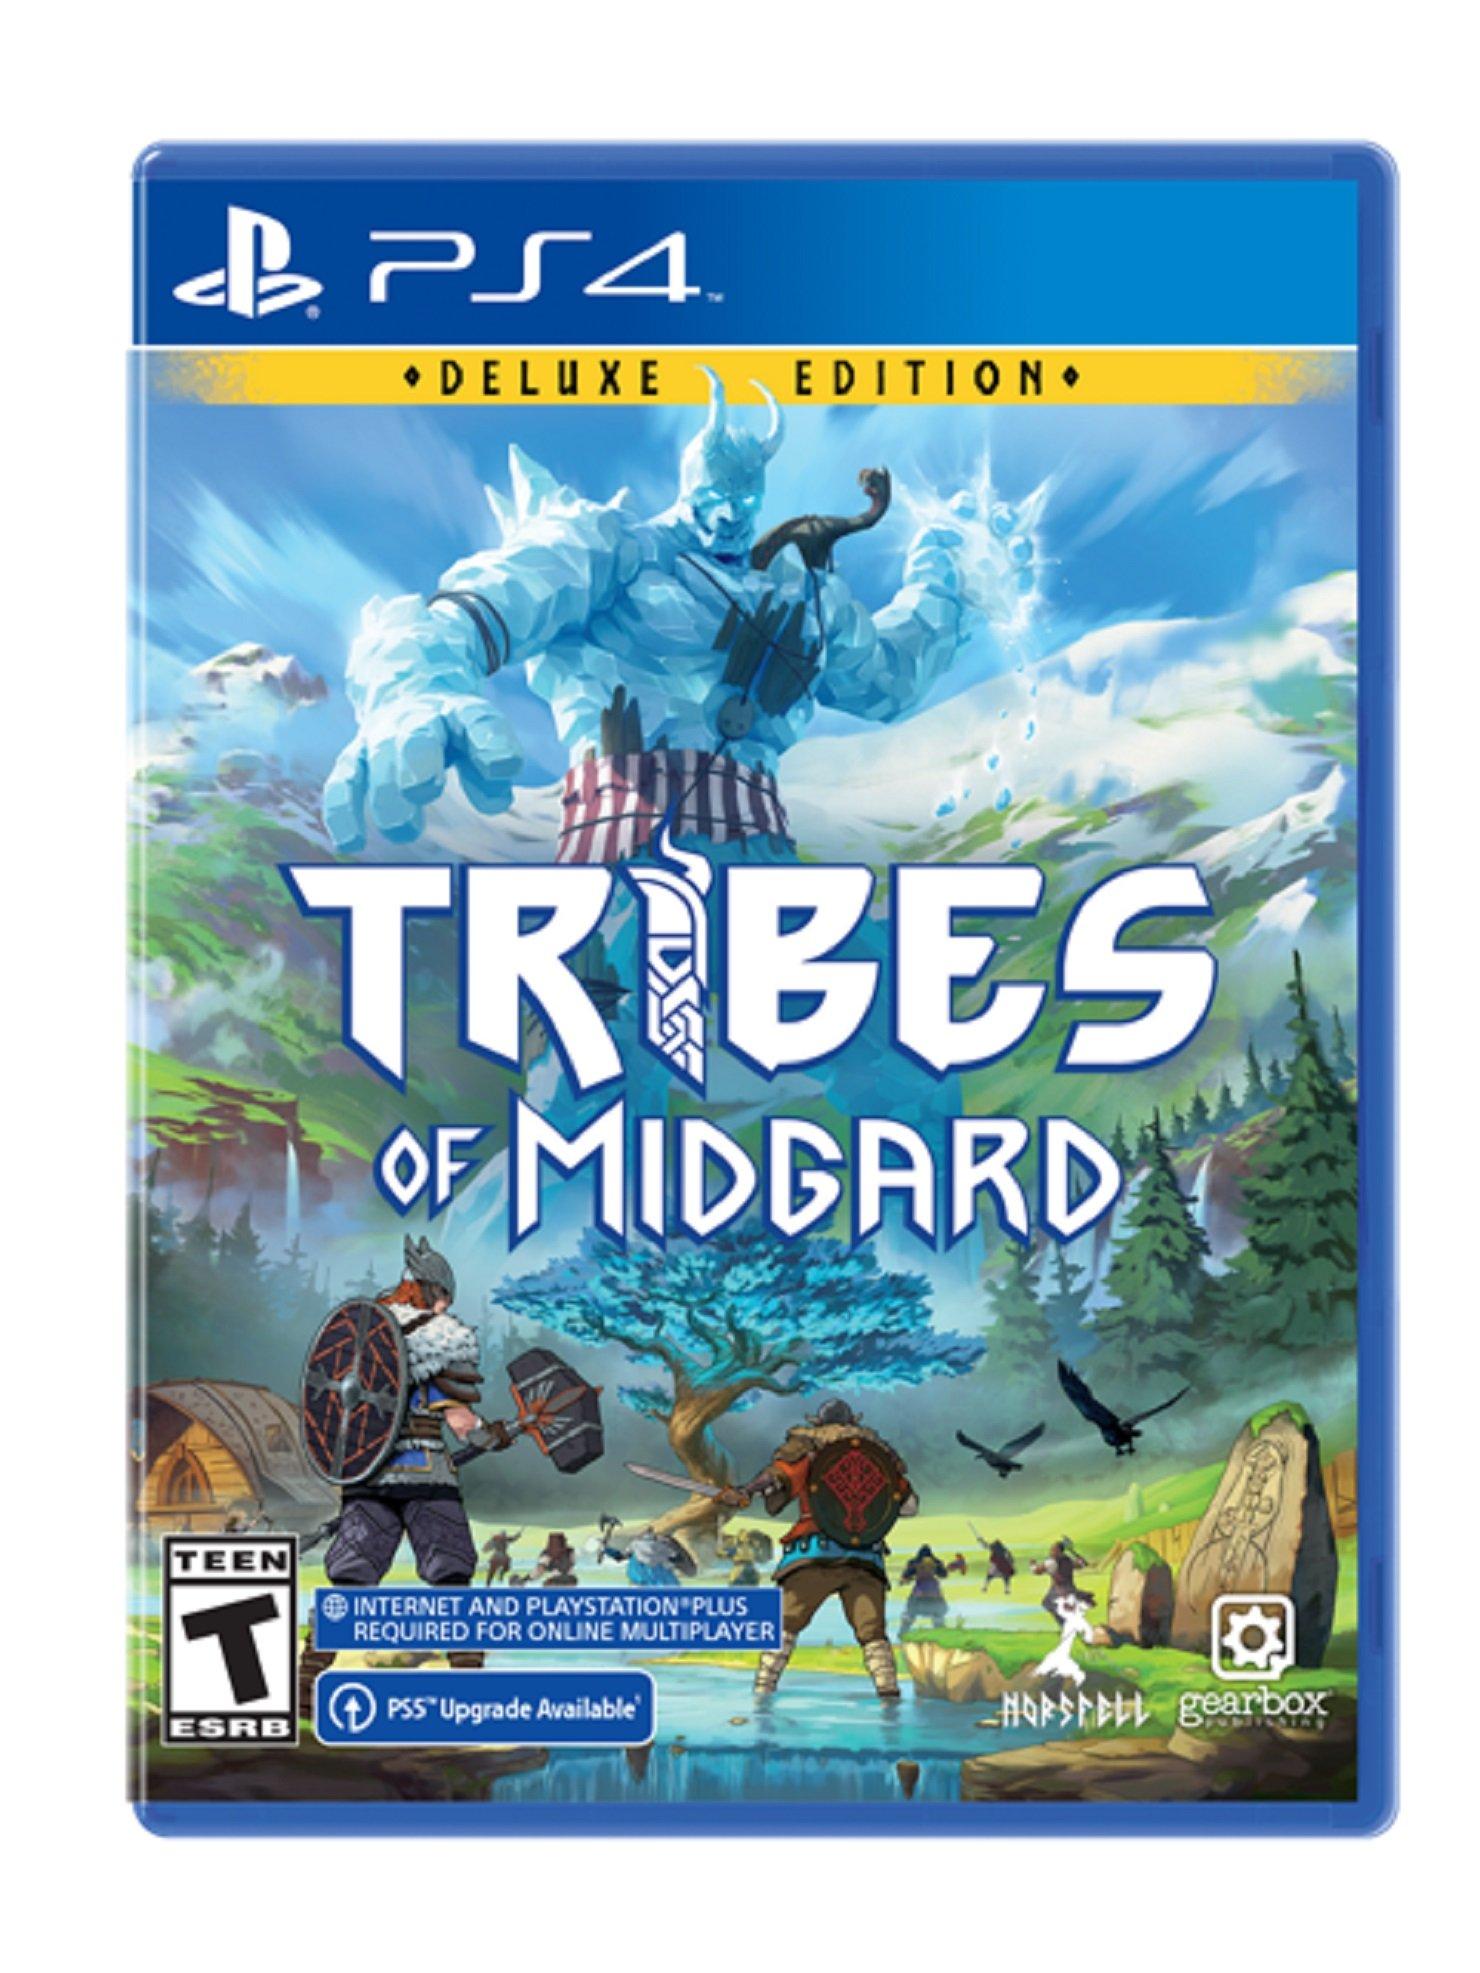 Tribes of Midgard | Download and Buy Today - Epic Games Store